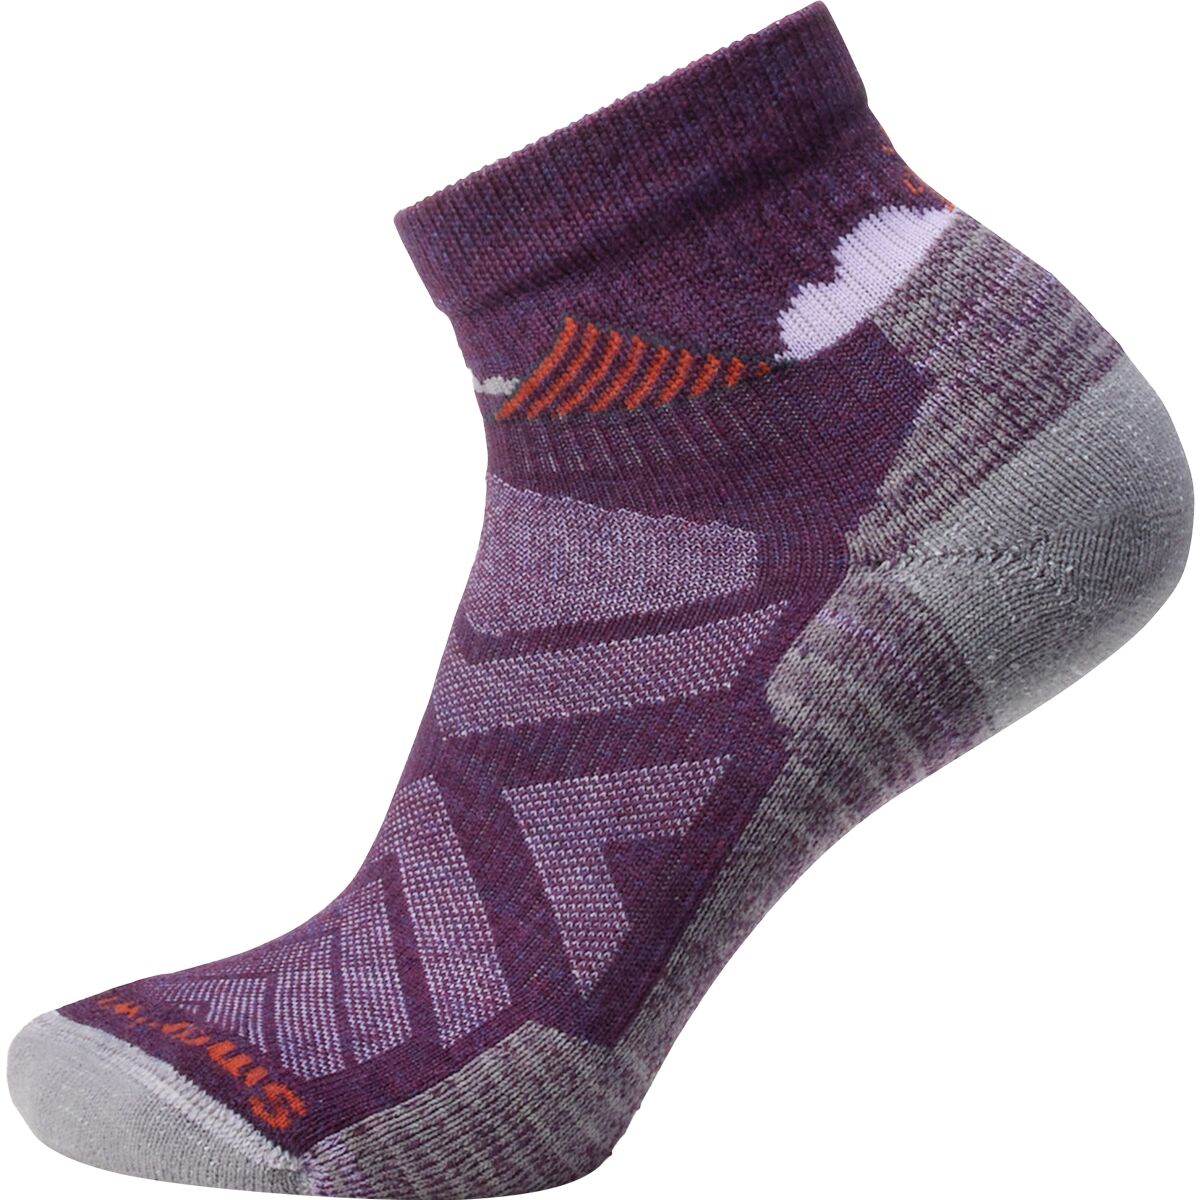 Smartwool Hike Light Cushion Clear Canyon Pattern Ankle Sock - Women's